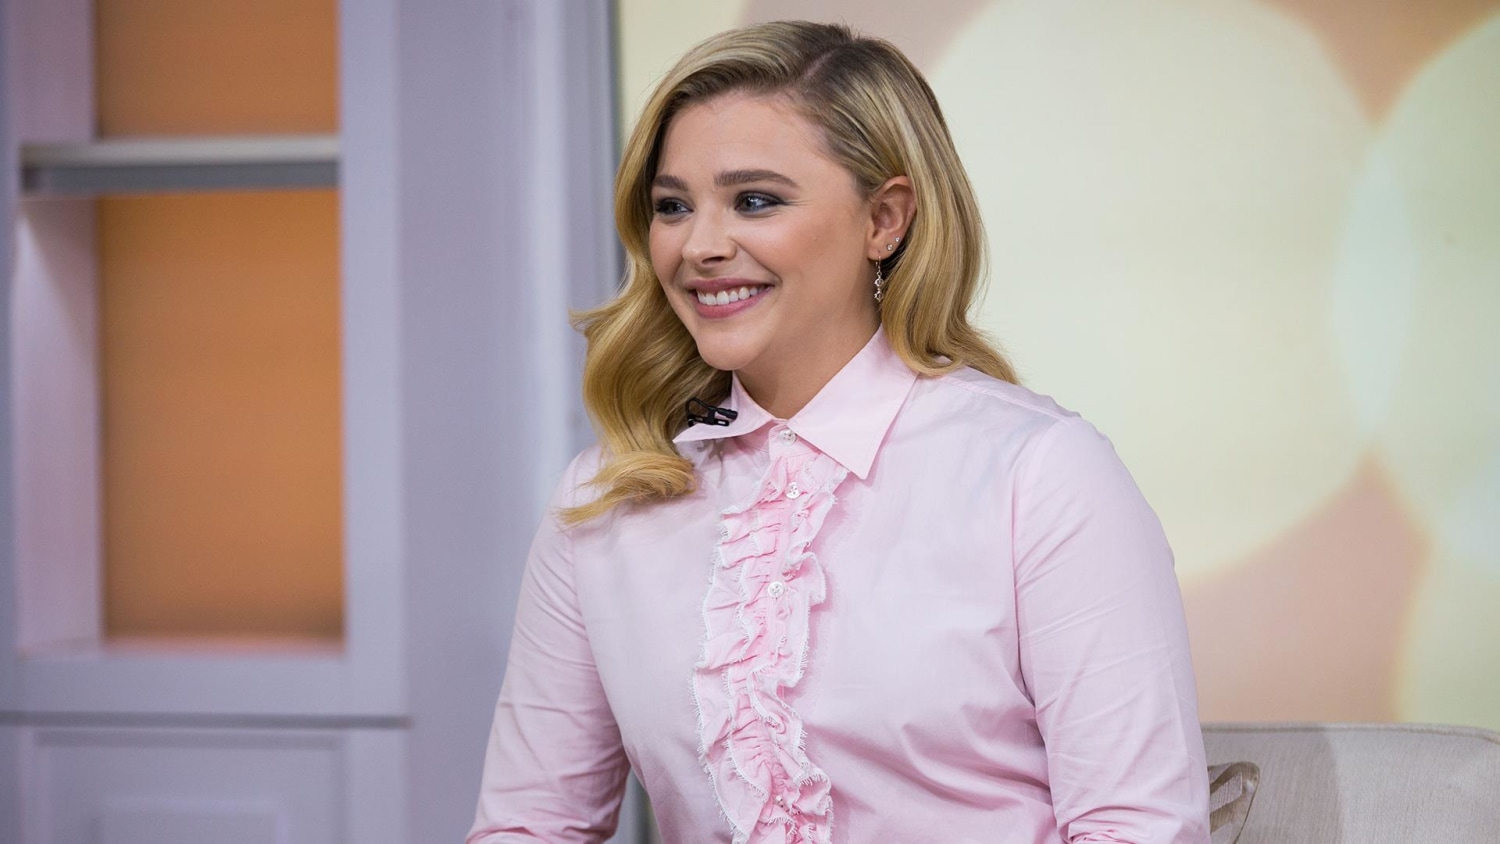 Chloe Grace Moretz says she was 'unhappy with the size' of her breasts and  felt pressure to get implants